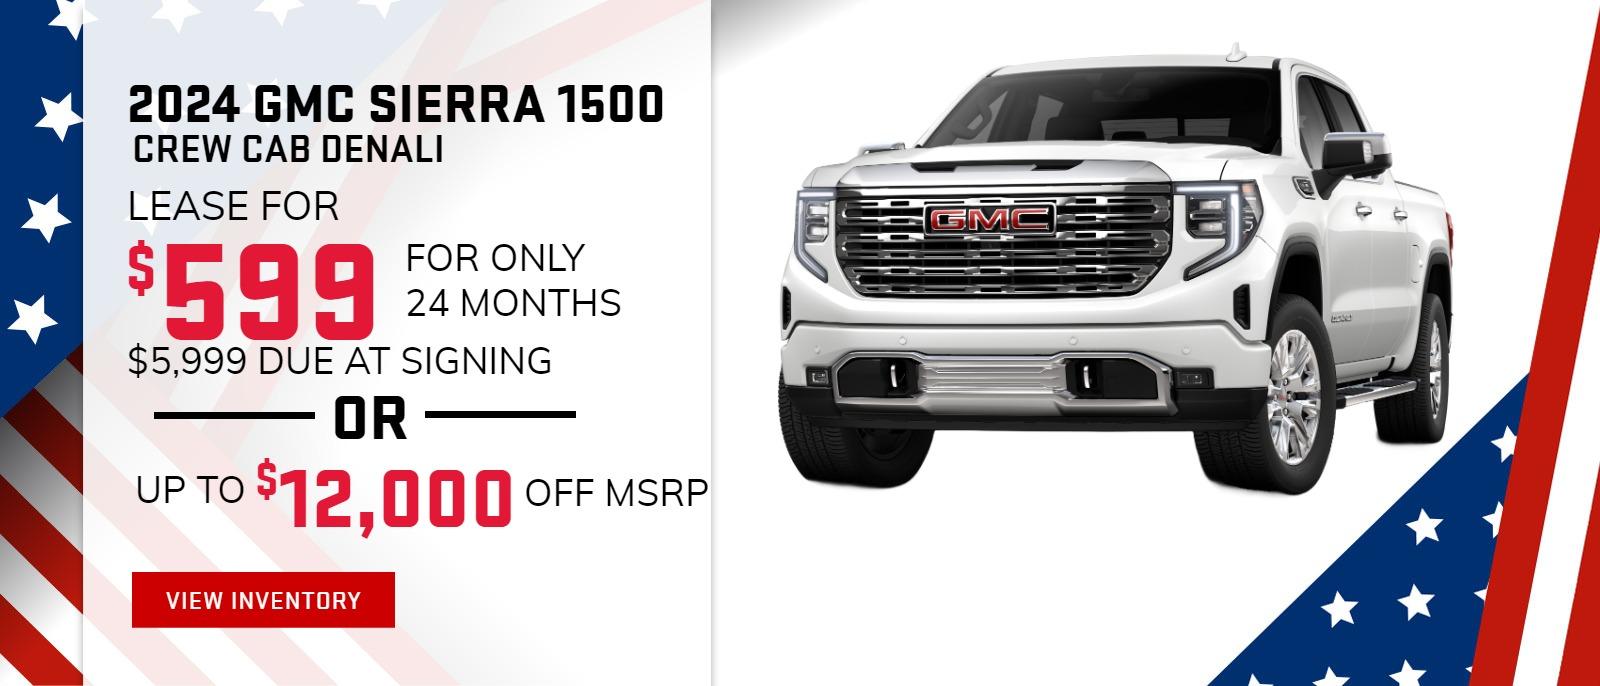 2024 GMC SIERRA ELEVATION 4WD CREW CAB
$599 Per month / For Only 24 months / $5,999 Due at Signing
$12,000 OFF MSRP